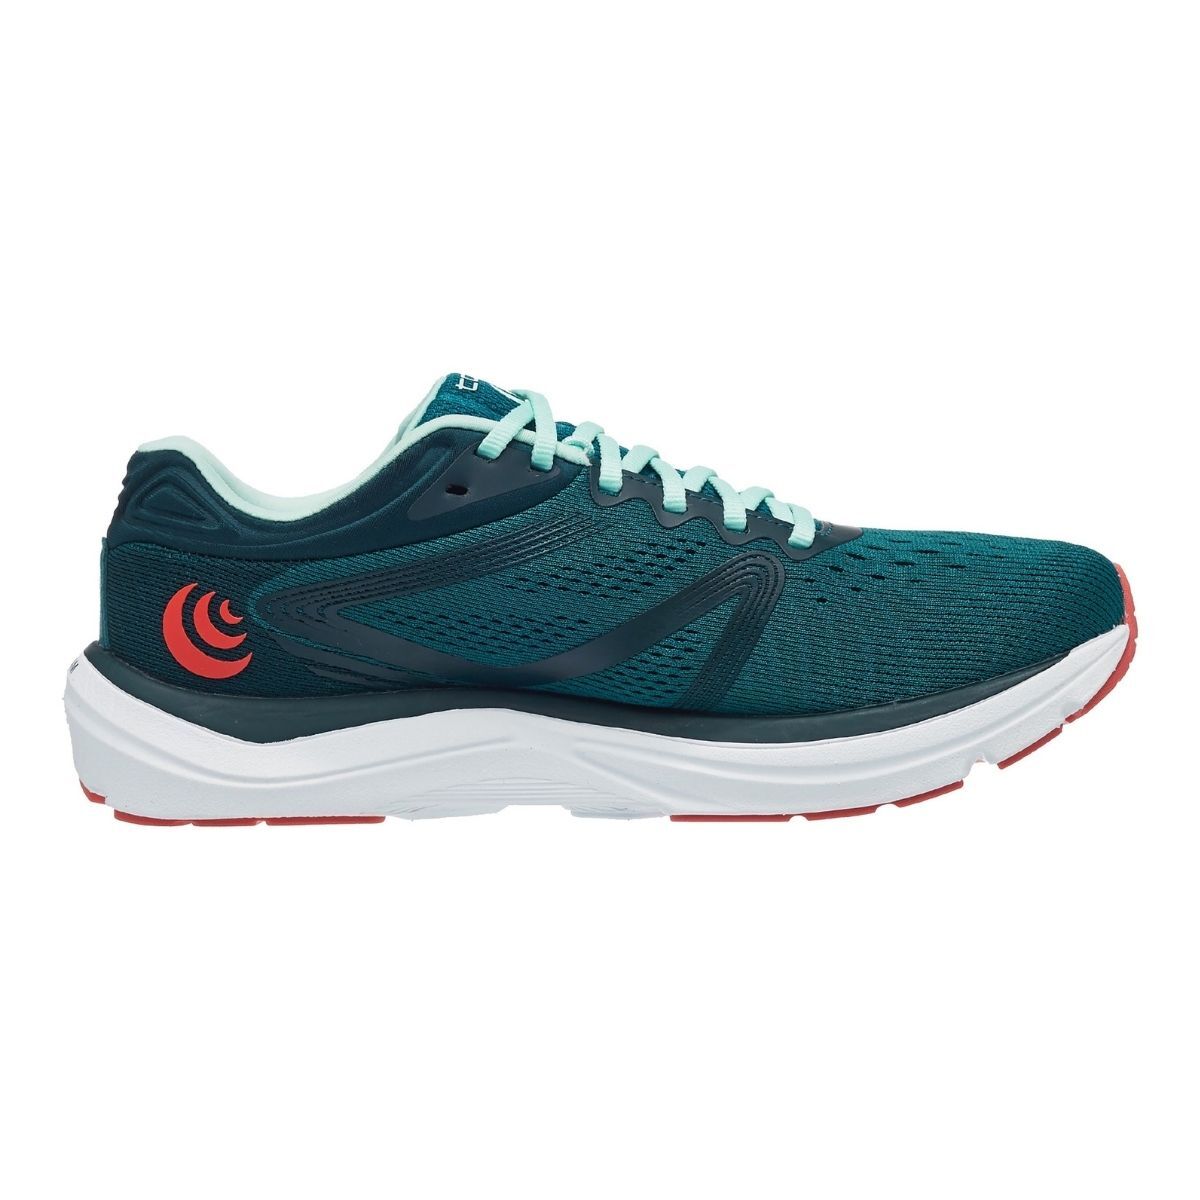 Topo Athletic Magnifly 4 - Running shoes - Women's